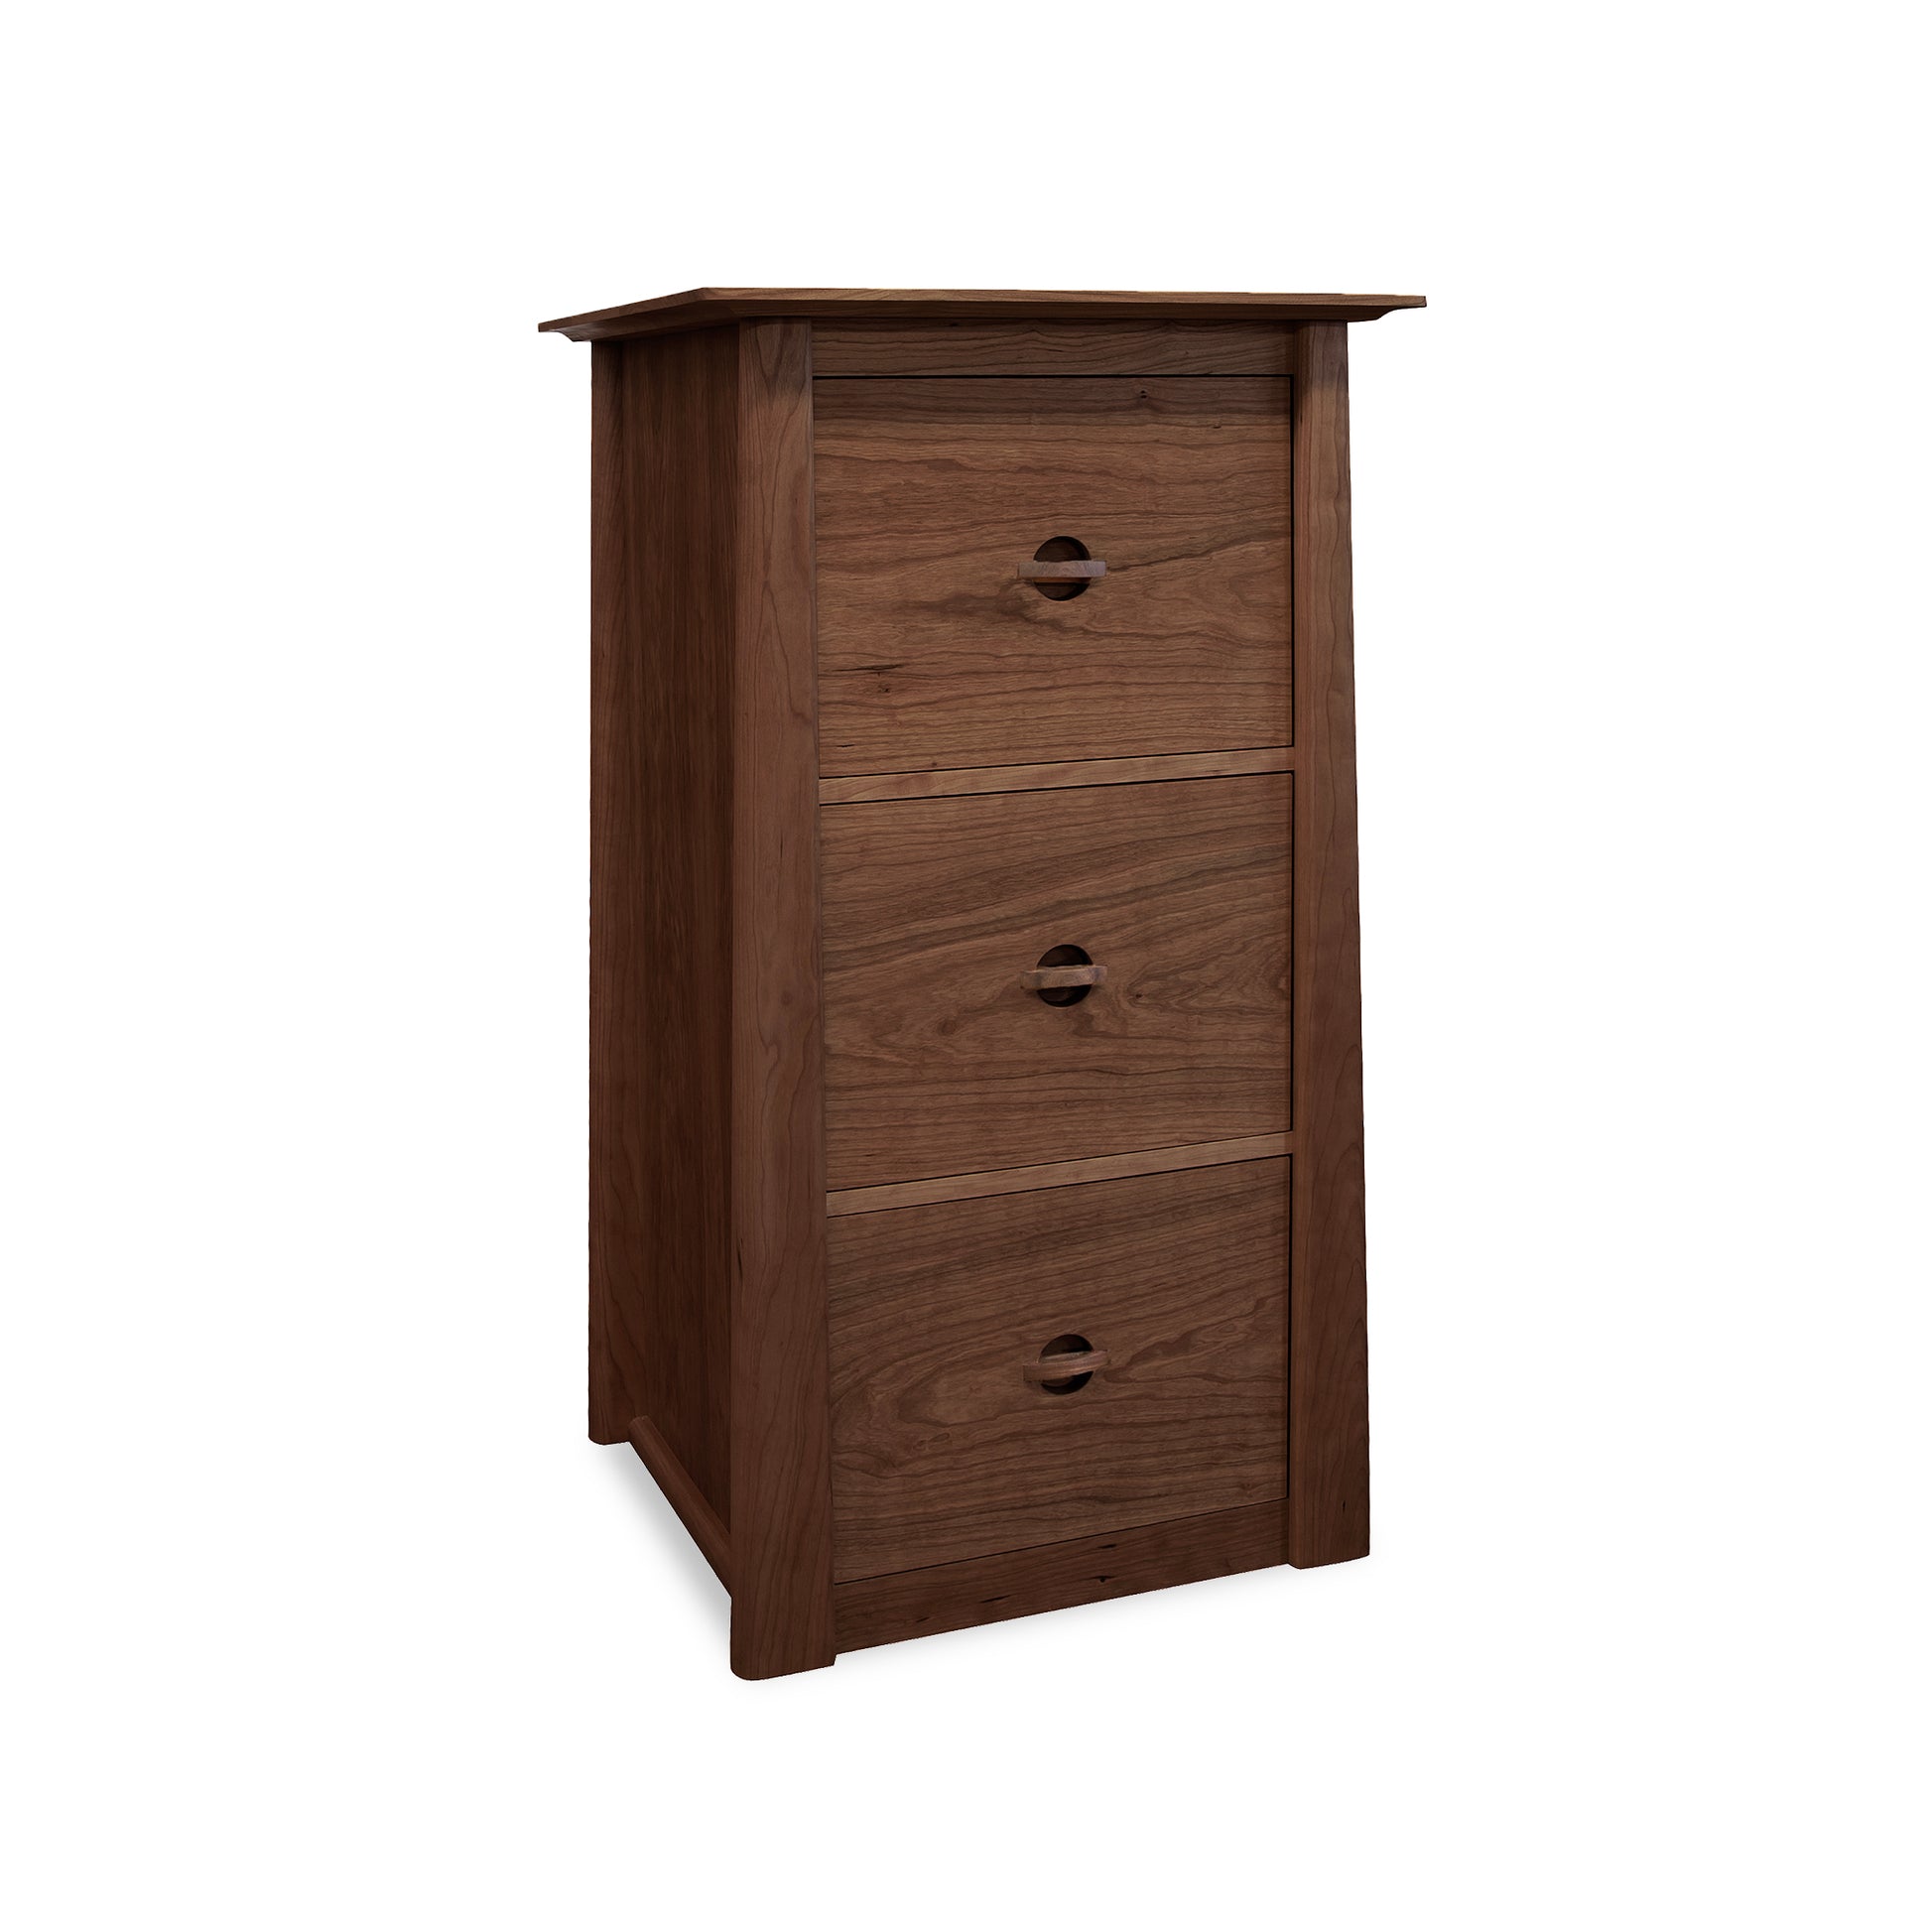 A Cherry Moon four-drawer hardwood filing cabinet for letter and legal files, isolated on a white background, by Maple Corner Woodworks.